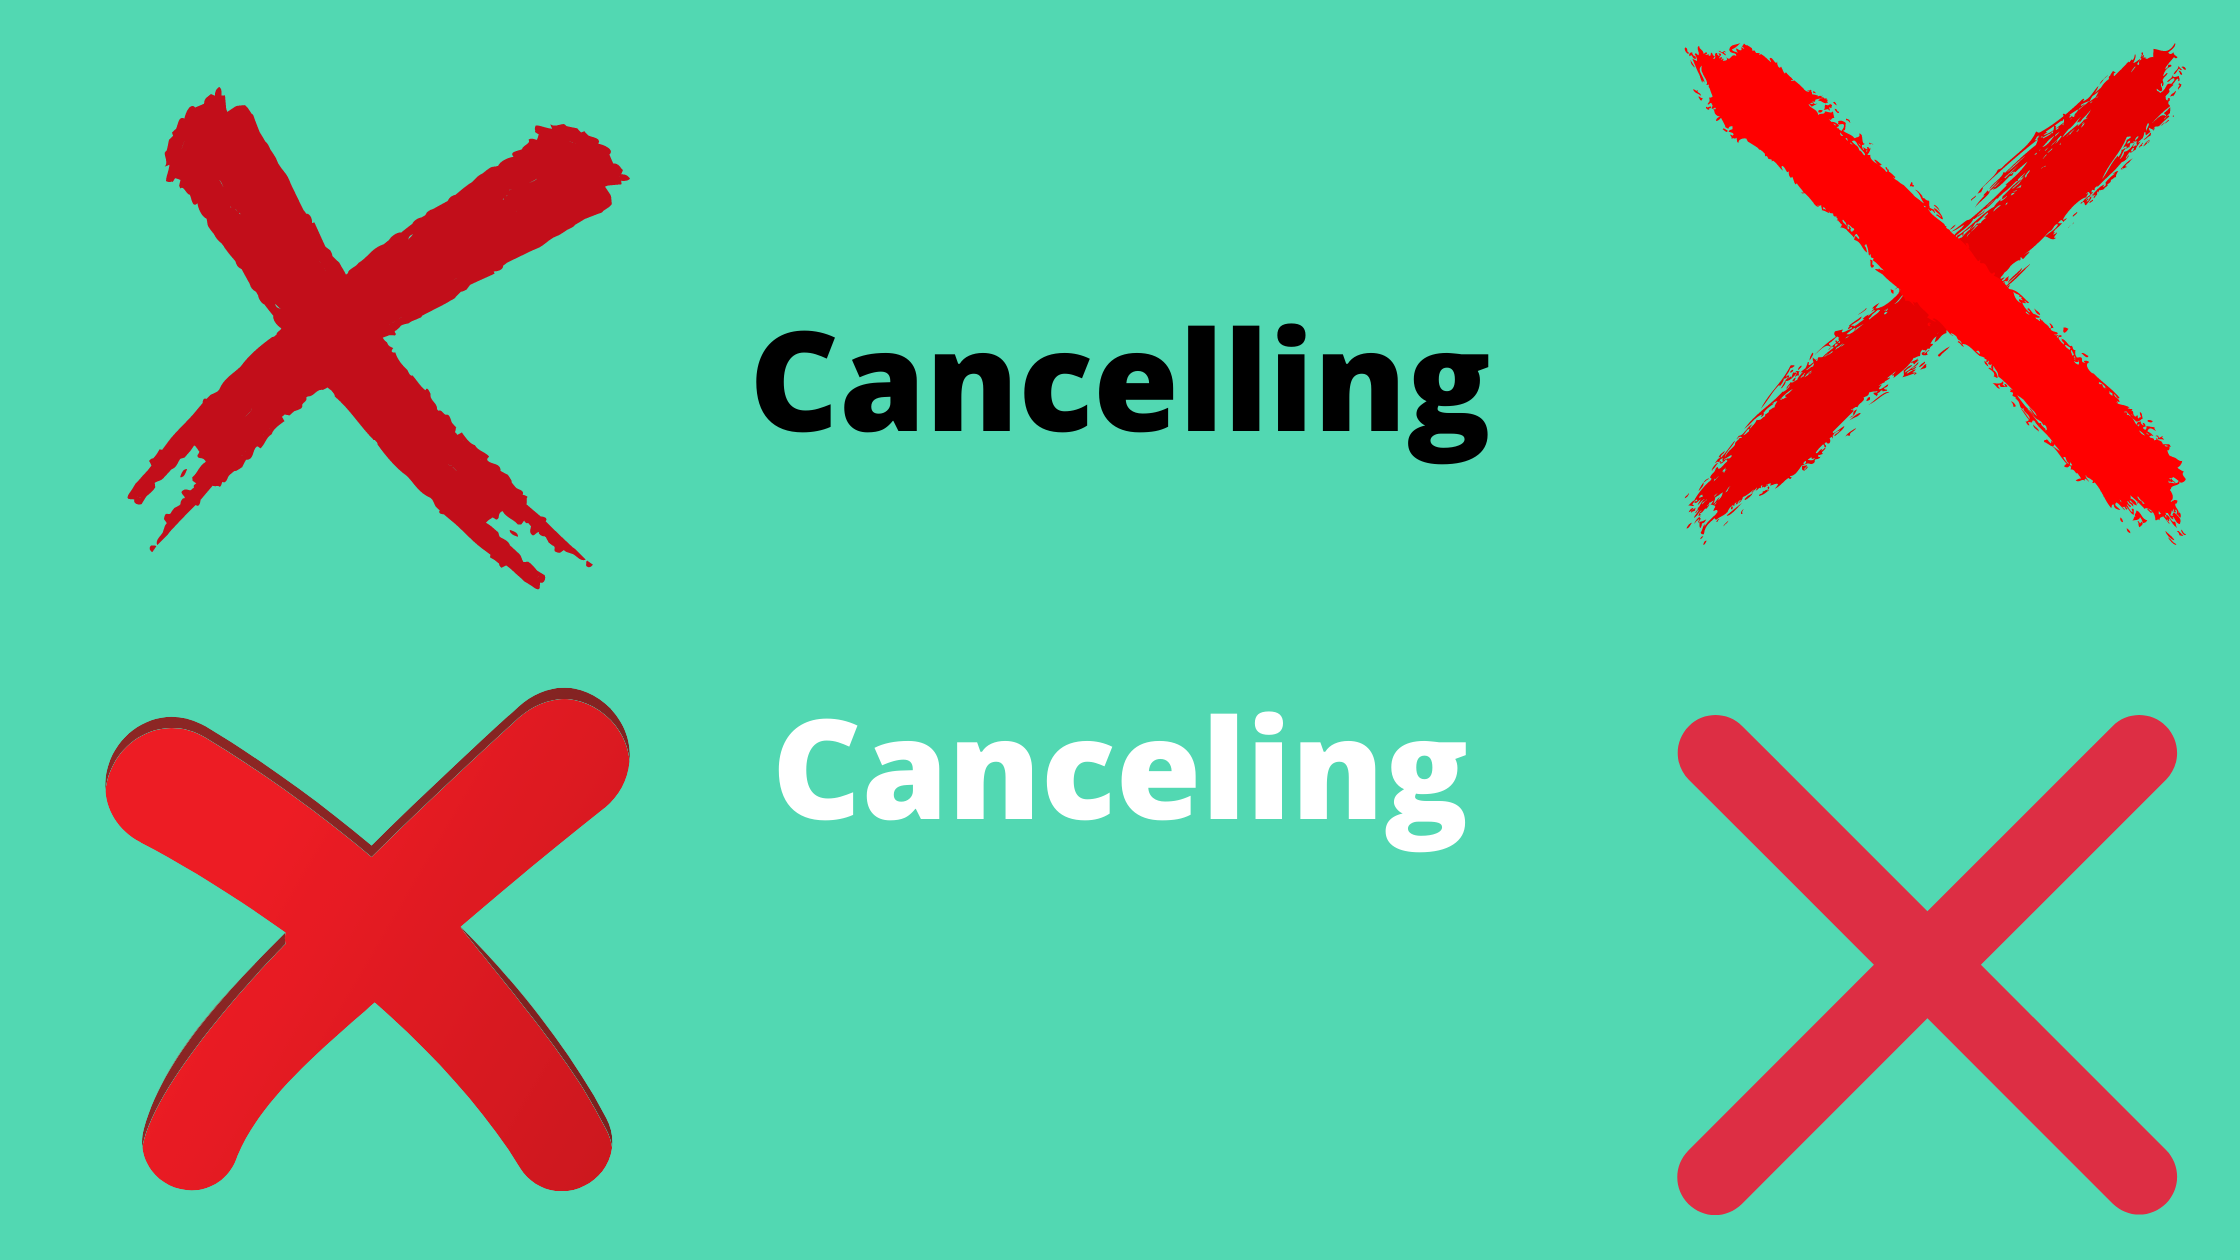 Or cancelled canceled 'Getting Canceled'